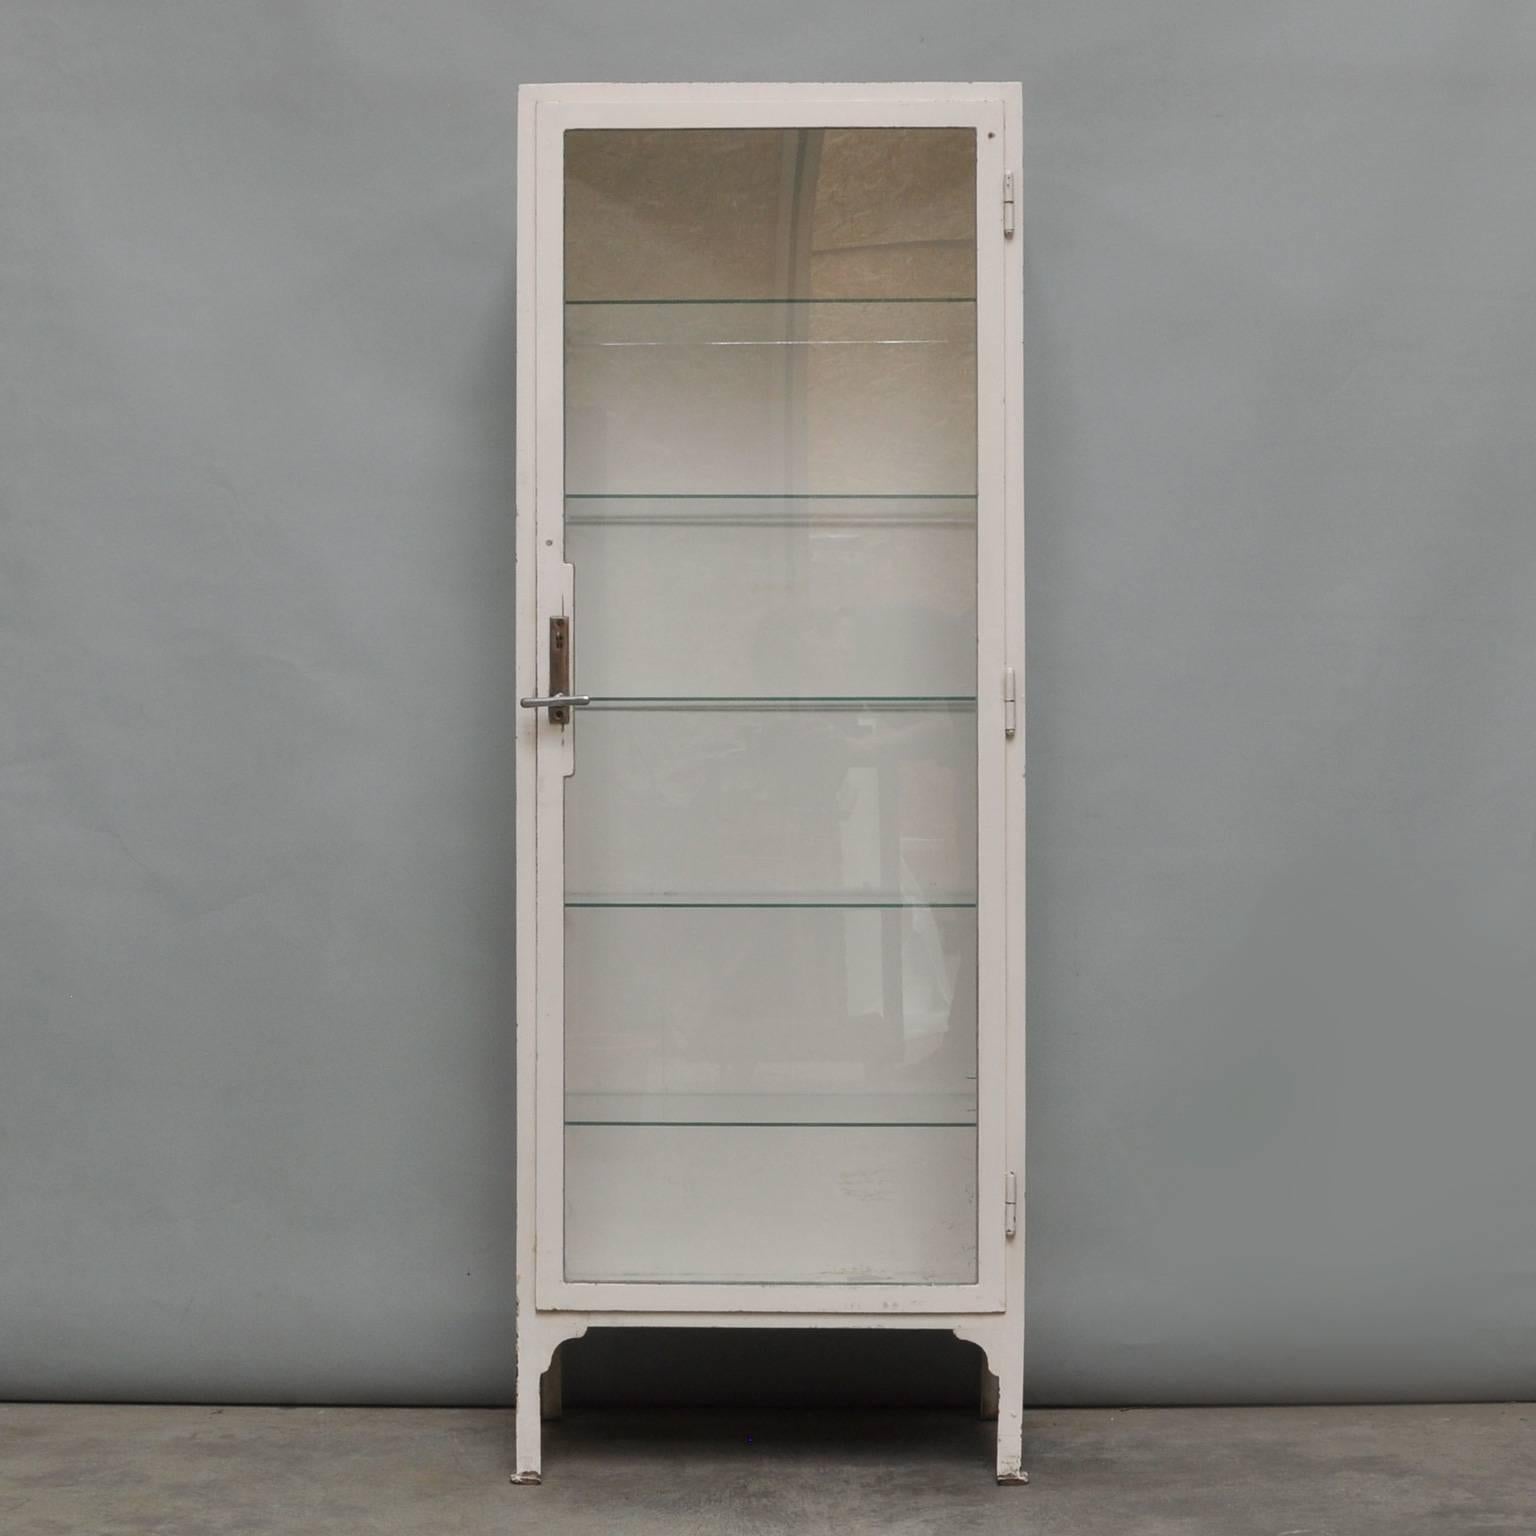 This vintage cabinet was produced in Austria during the 1940s. The cabinet is made of thick steel and comes with five glass shelves. The glass of the cabinet is antiqued. The item has a original lock. It is in a nice vintage condition, missing some